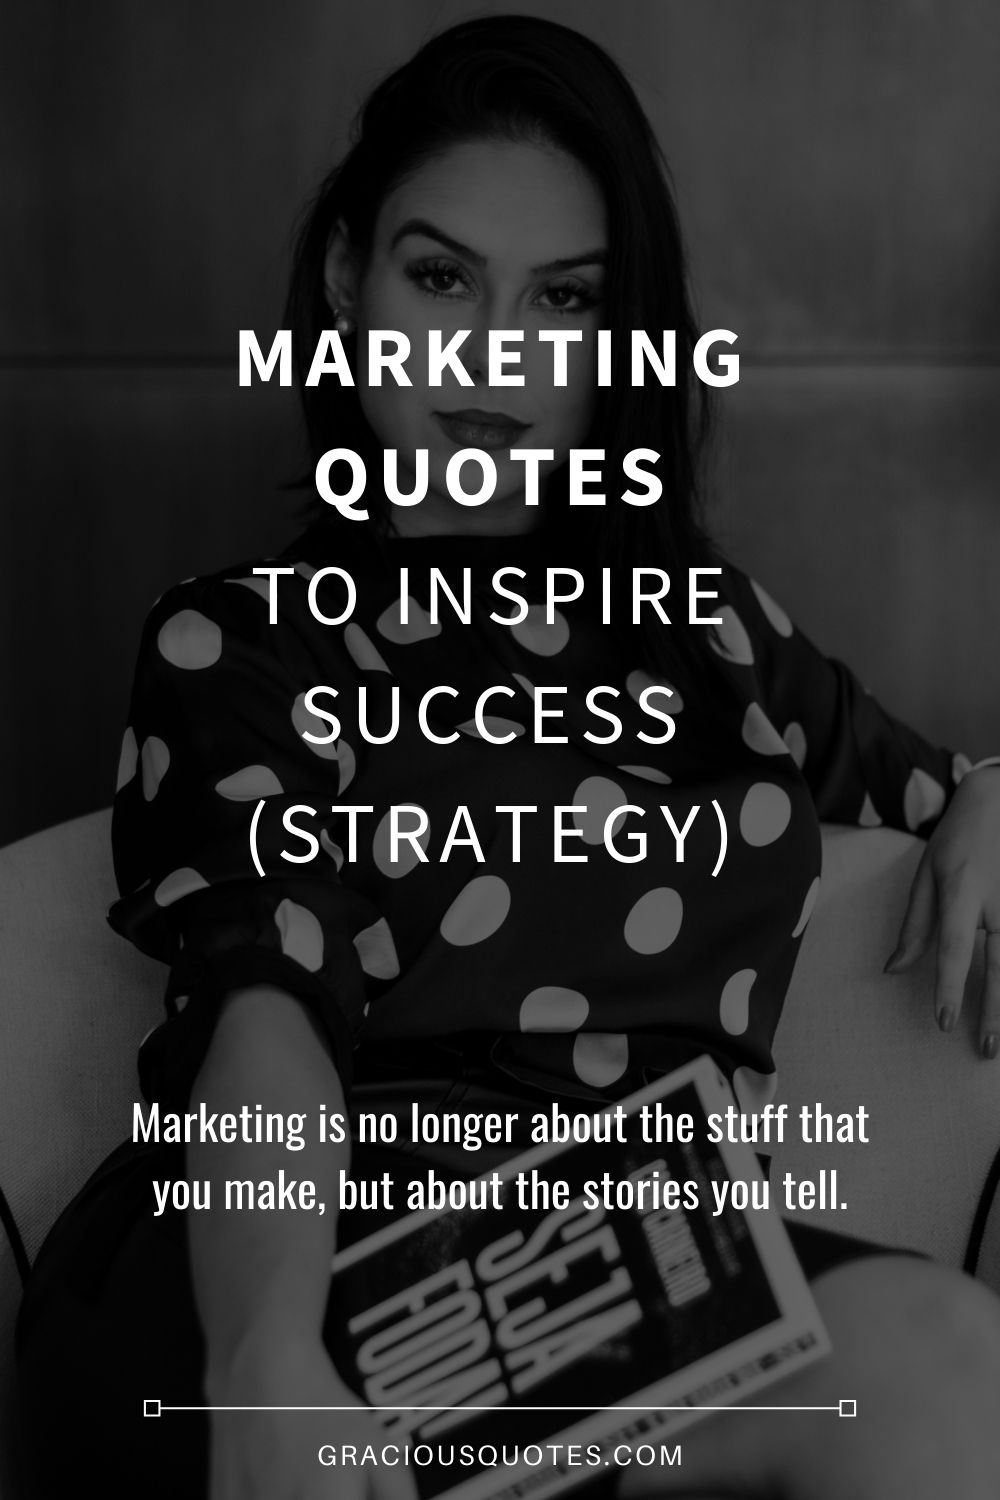 Marketing Quotes to Inspire Success (STRATEGY) - Gracious Quotes